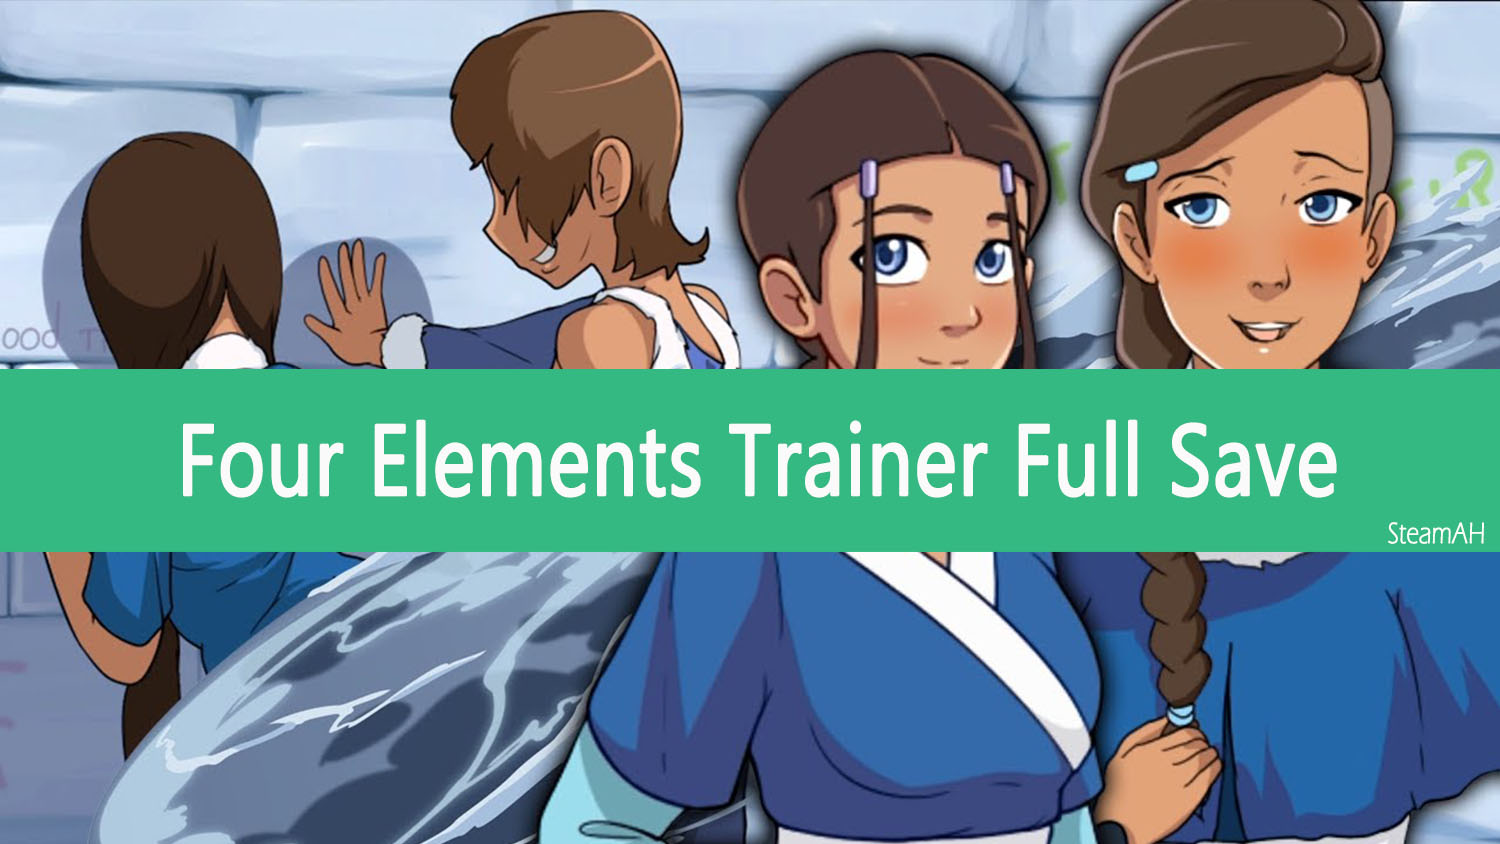 four elements trainer appa sex